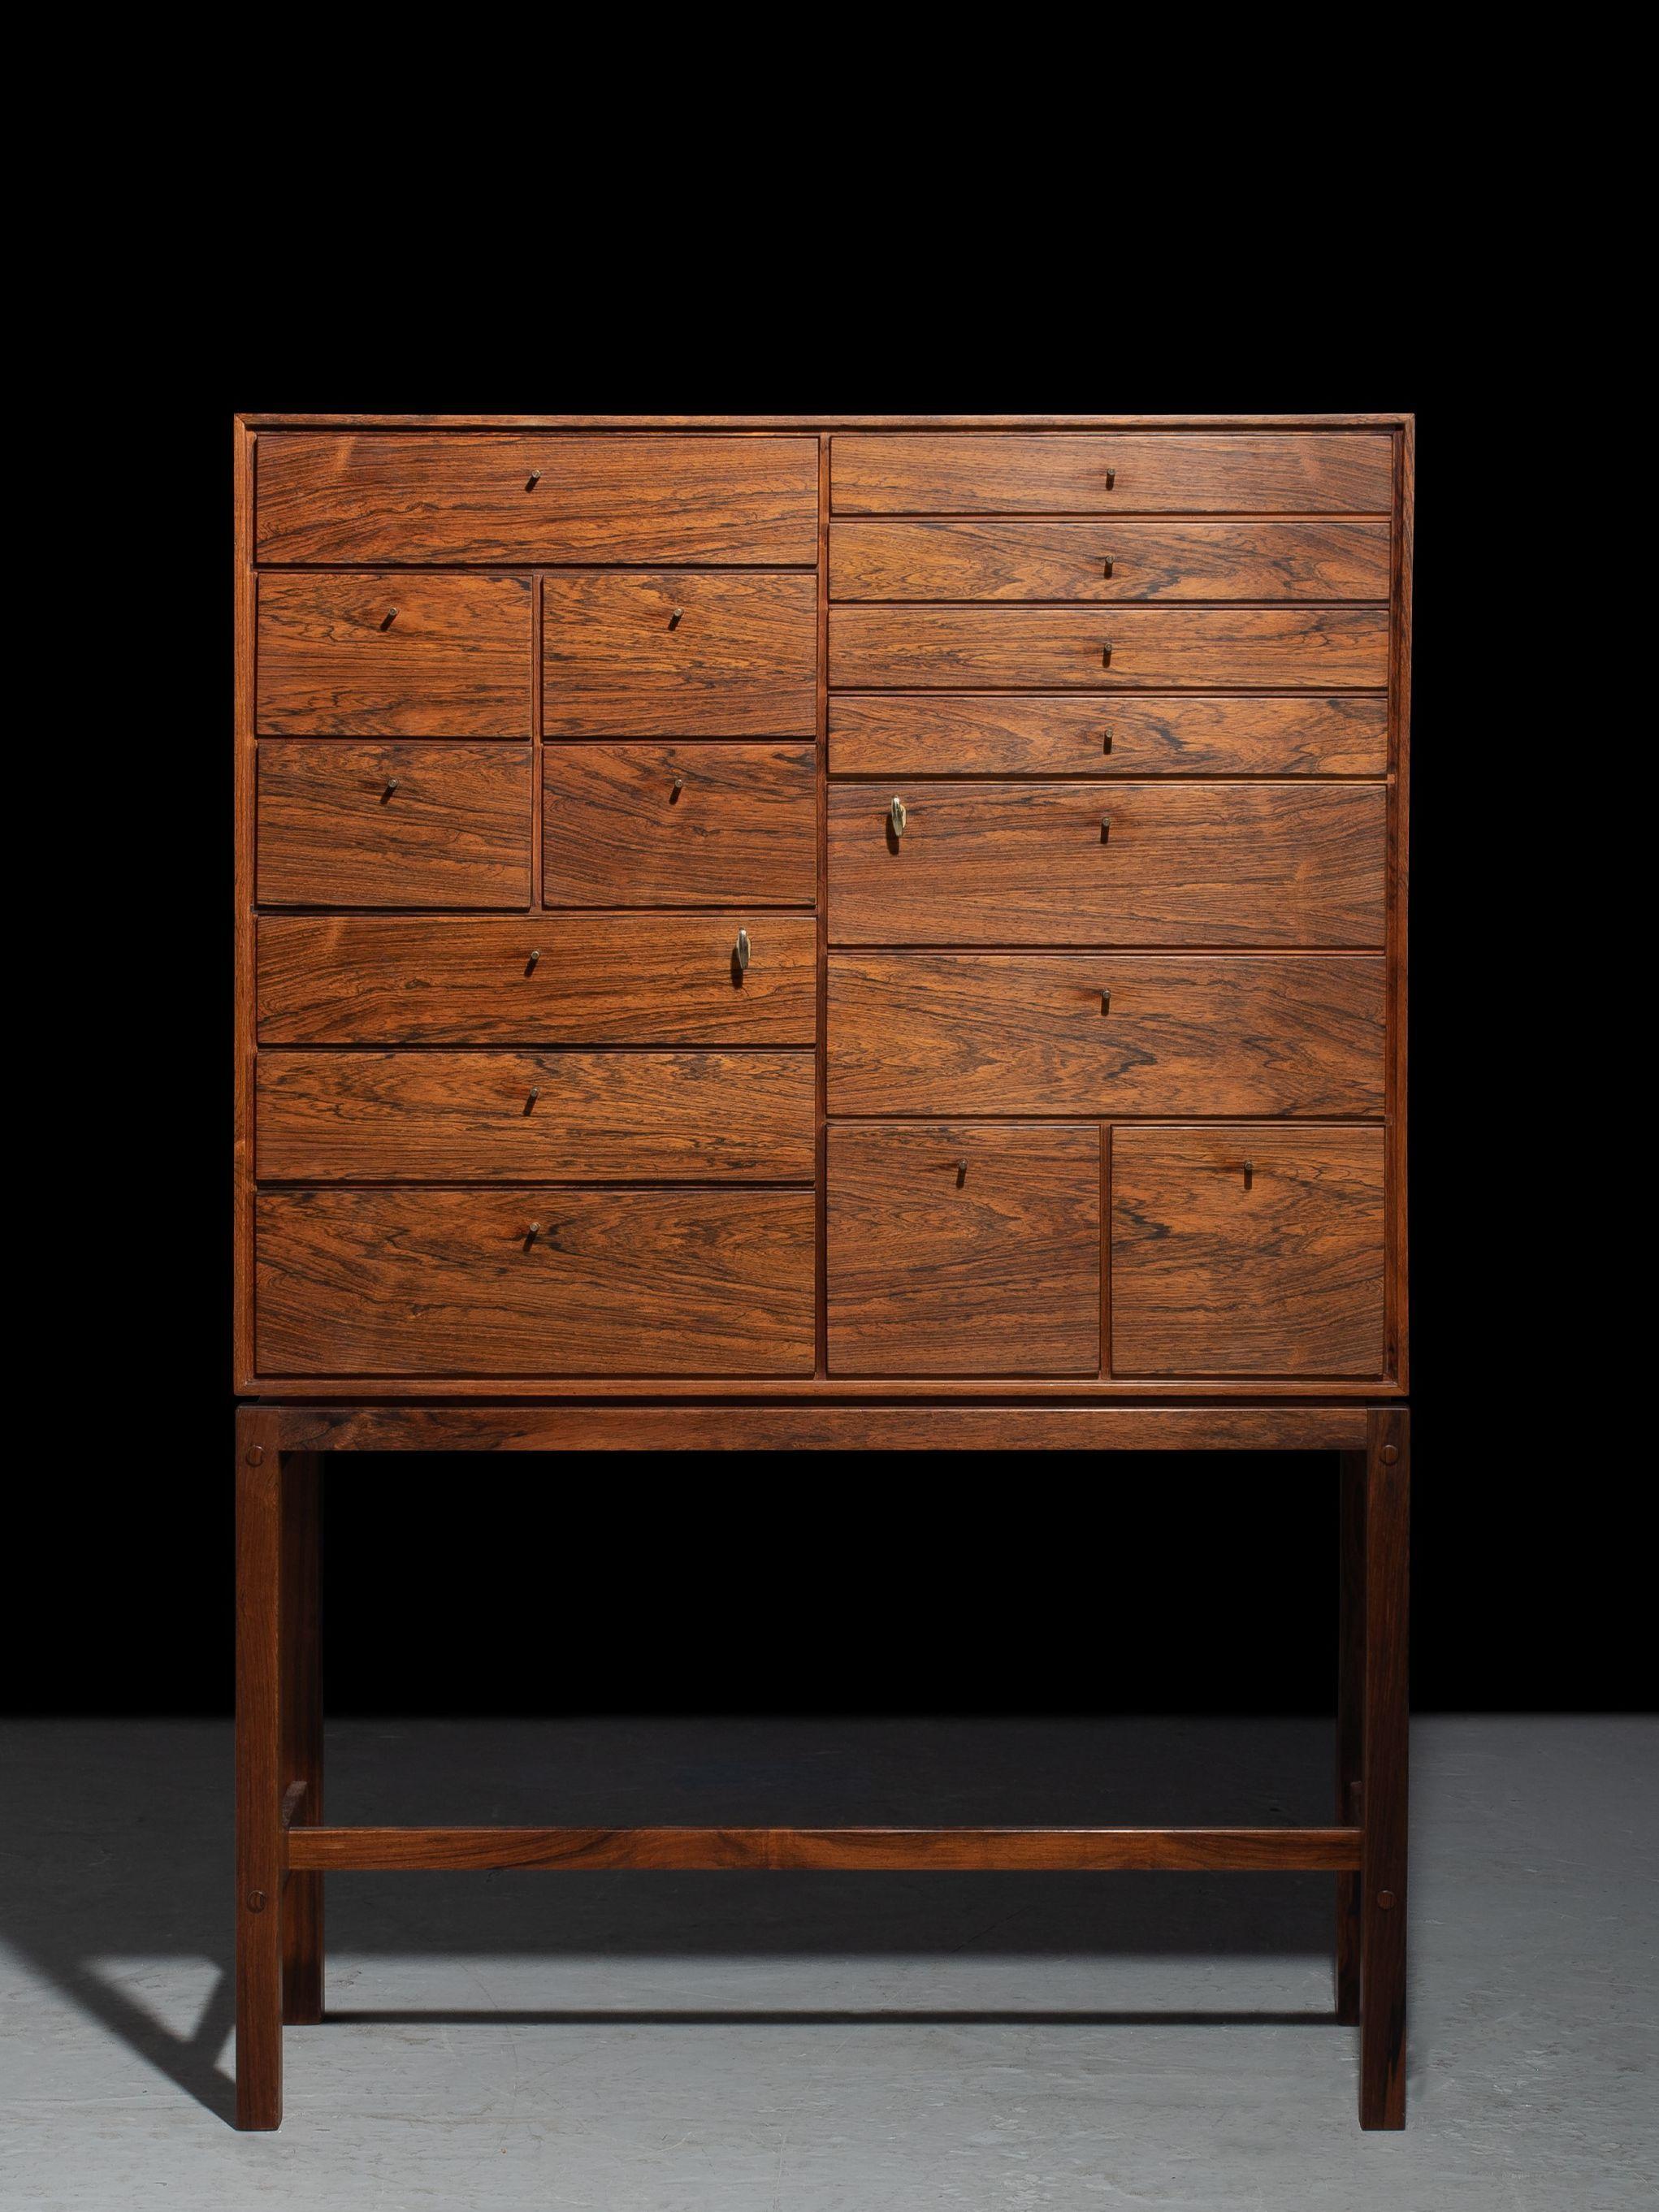 Cabinet in rosewood with 16 drawers and brass fittings made and designed by Fredericia Mobelfabrik in the 1960s. Two drawers has lock and comes with key.